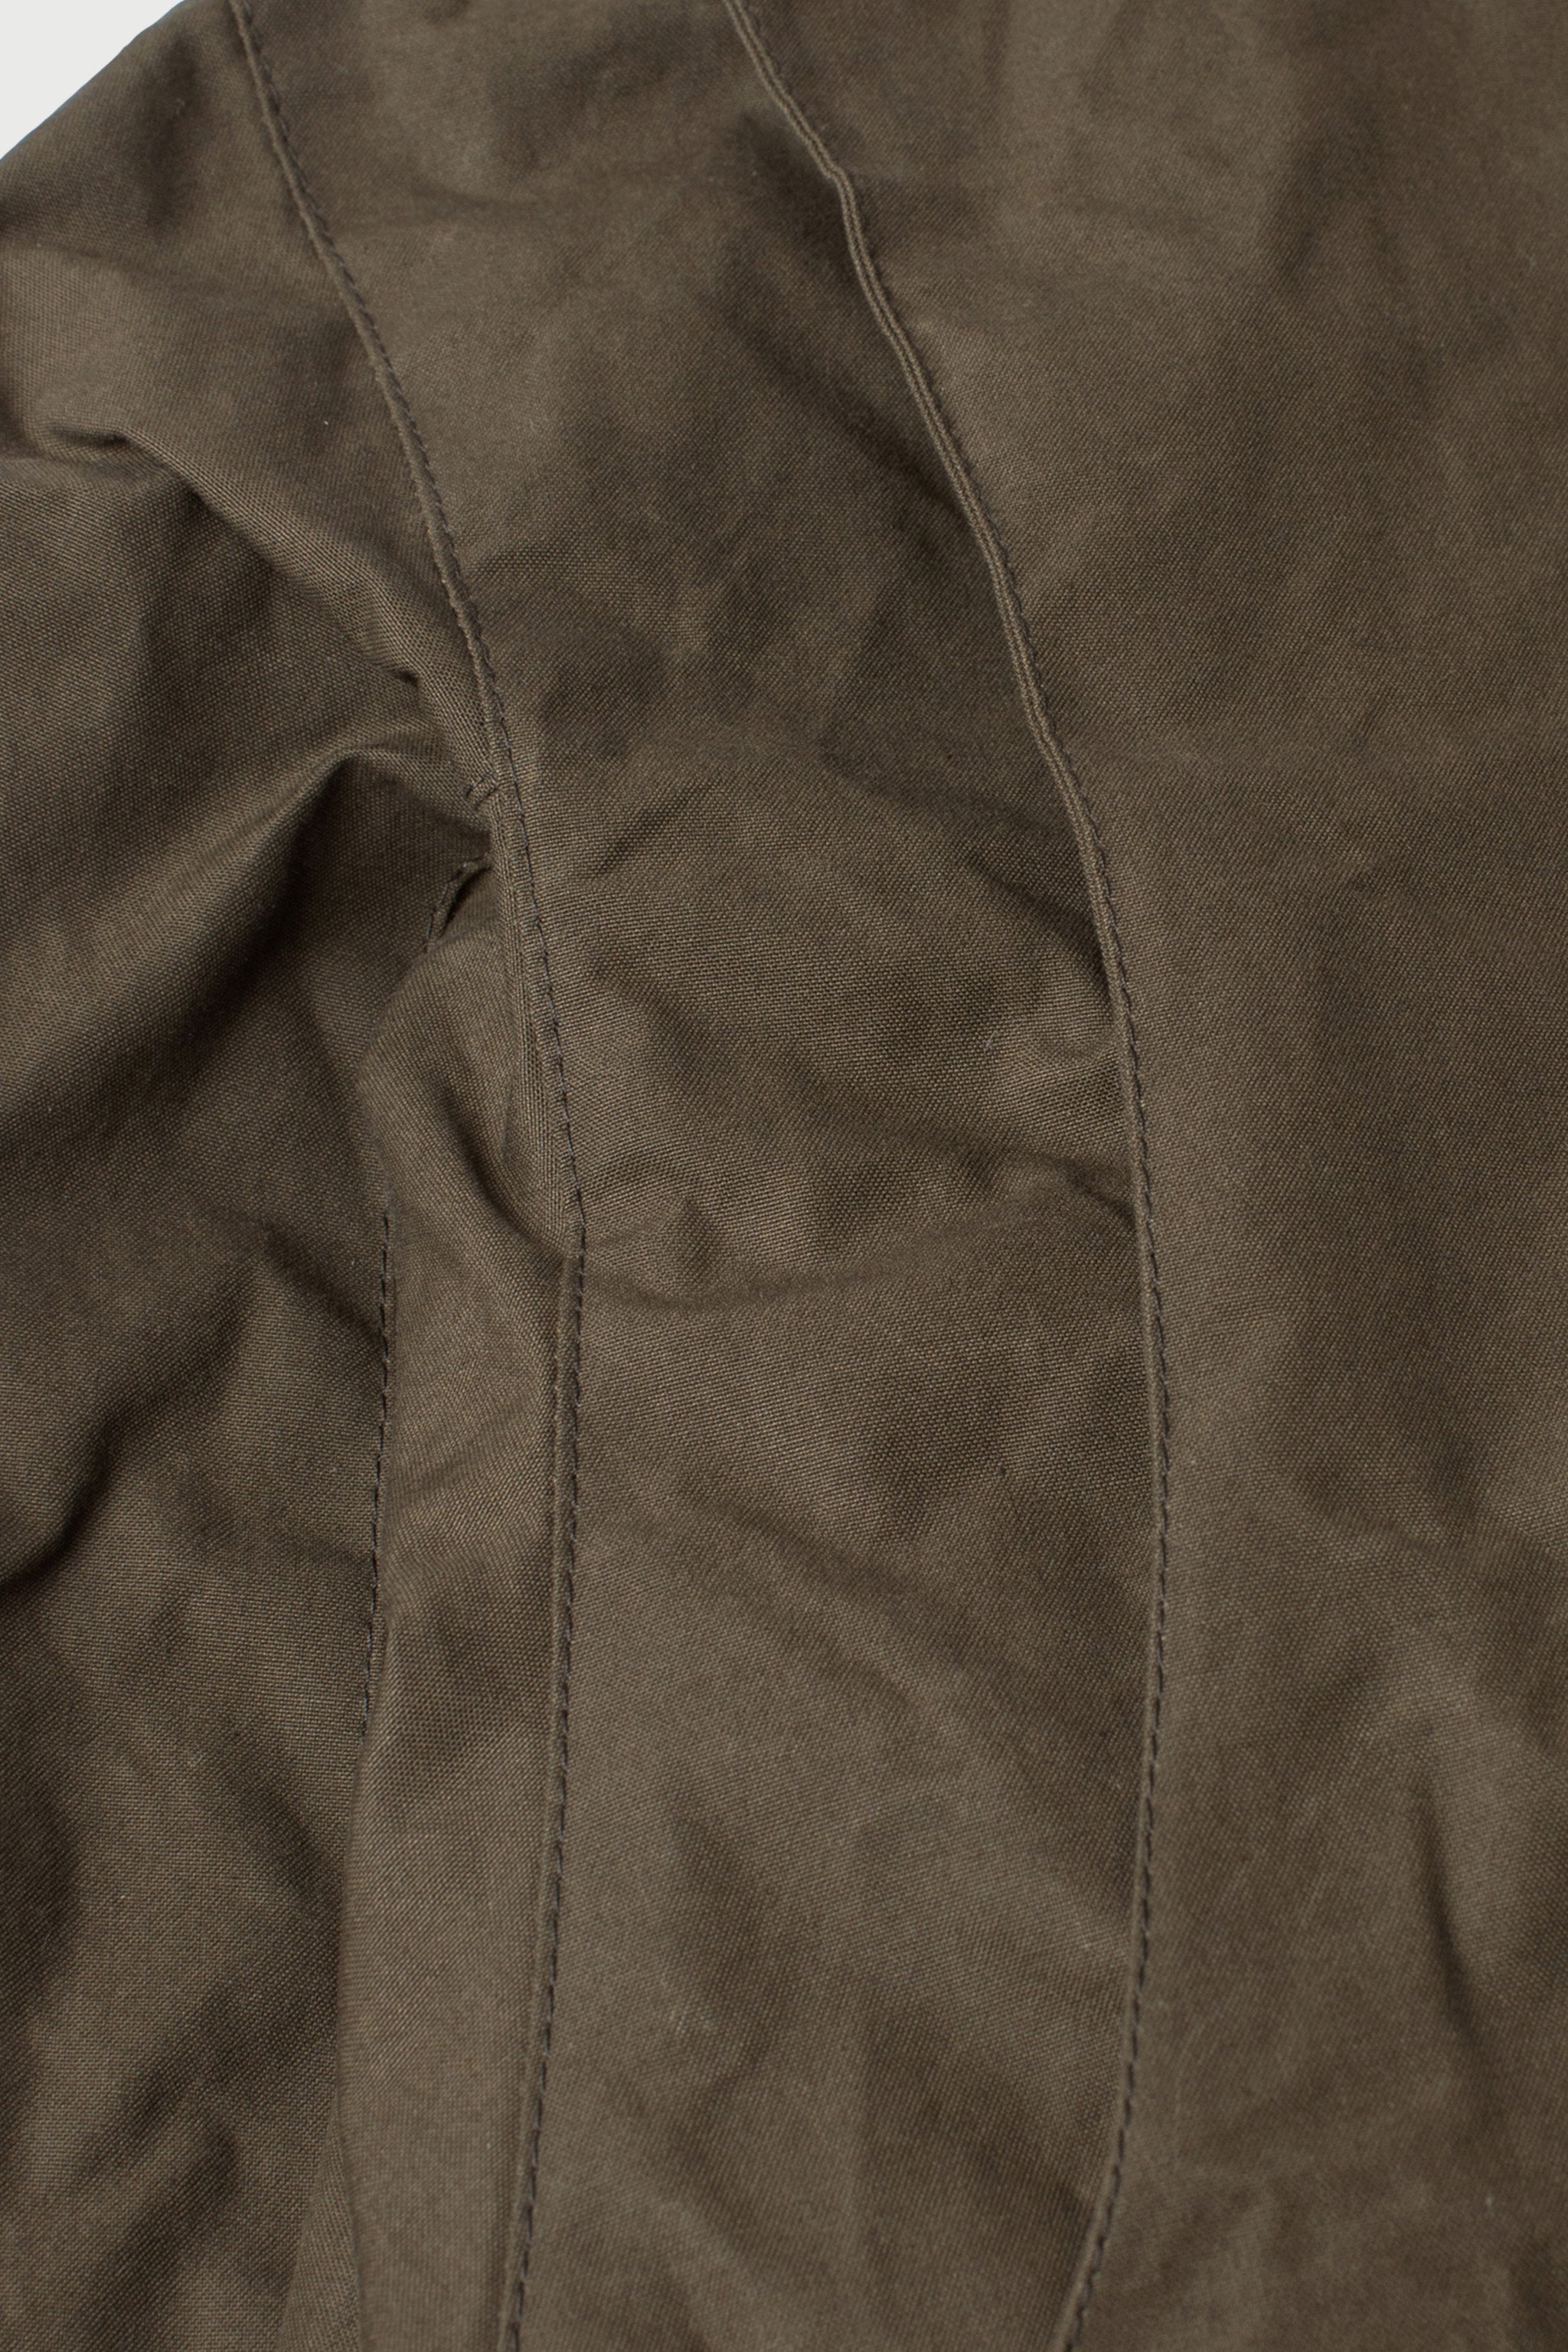 LAWRENCE FIELD JACKET – The Workers Club